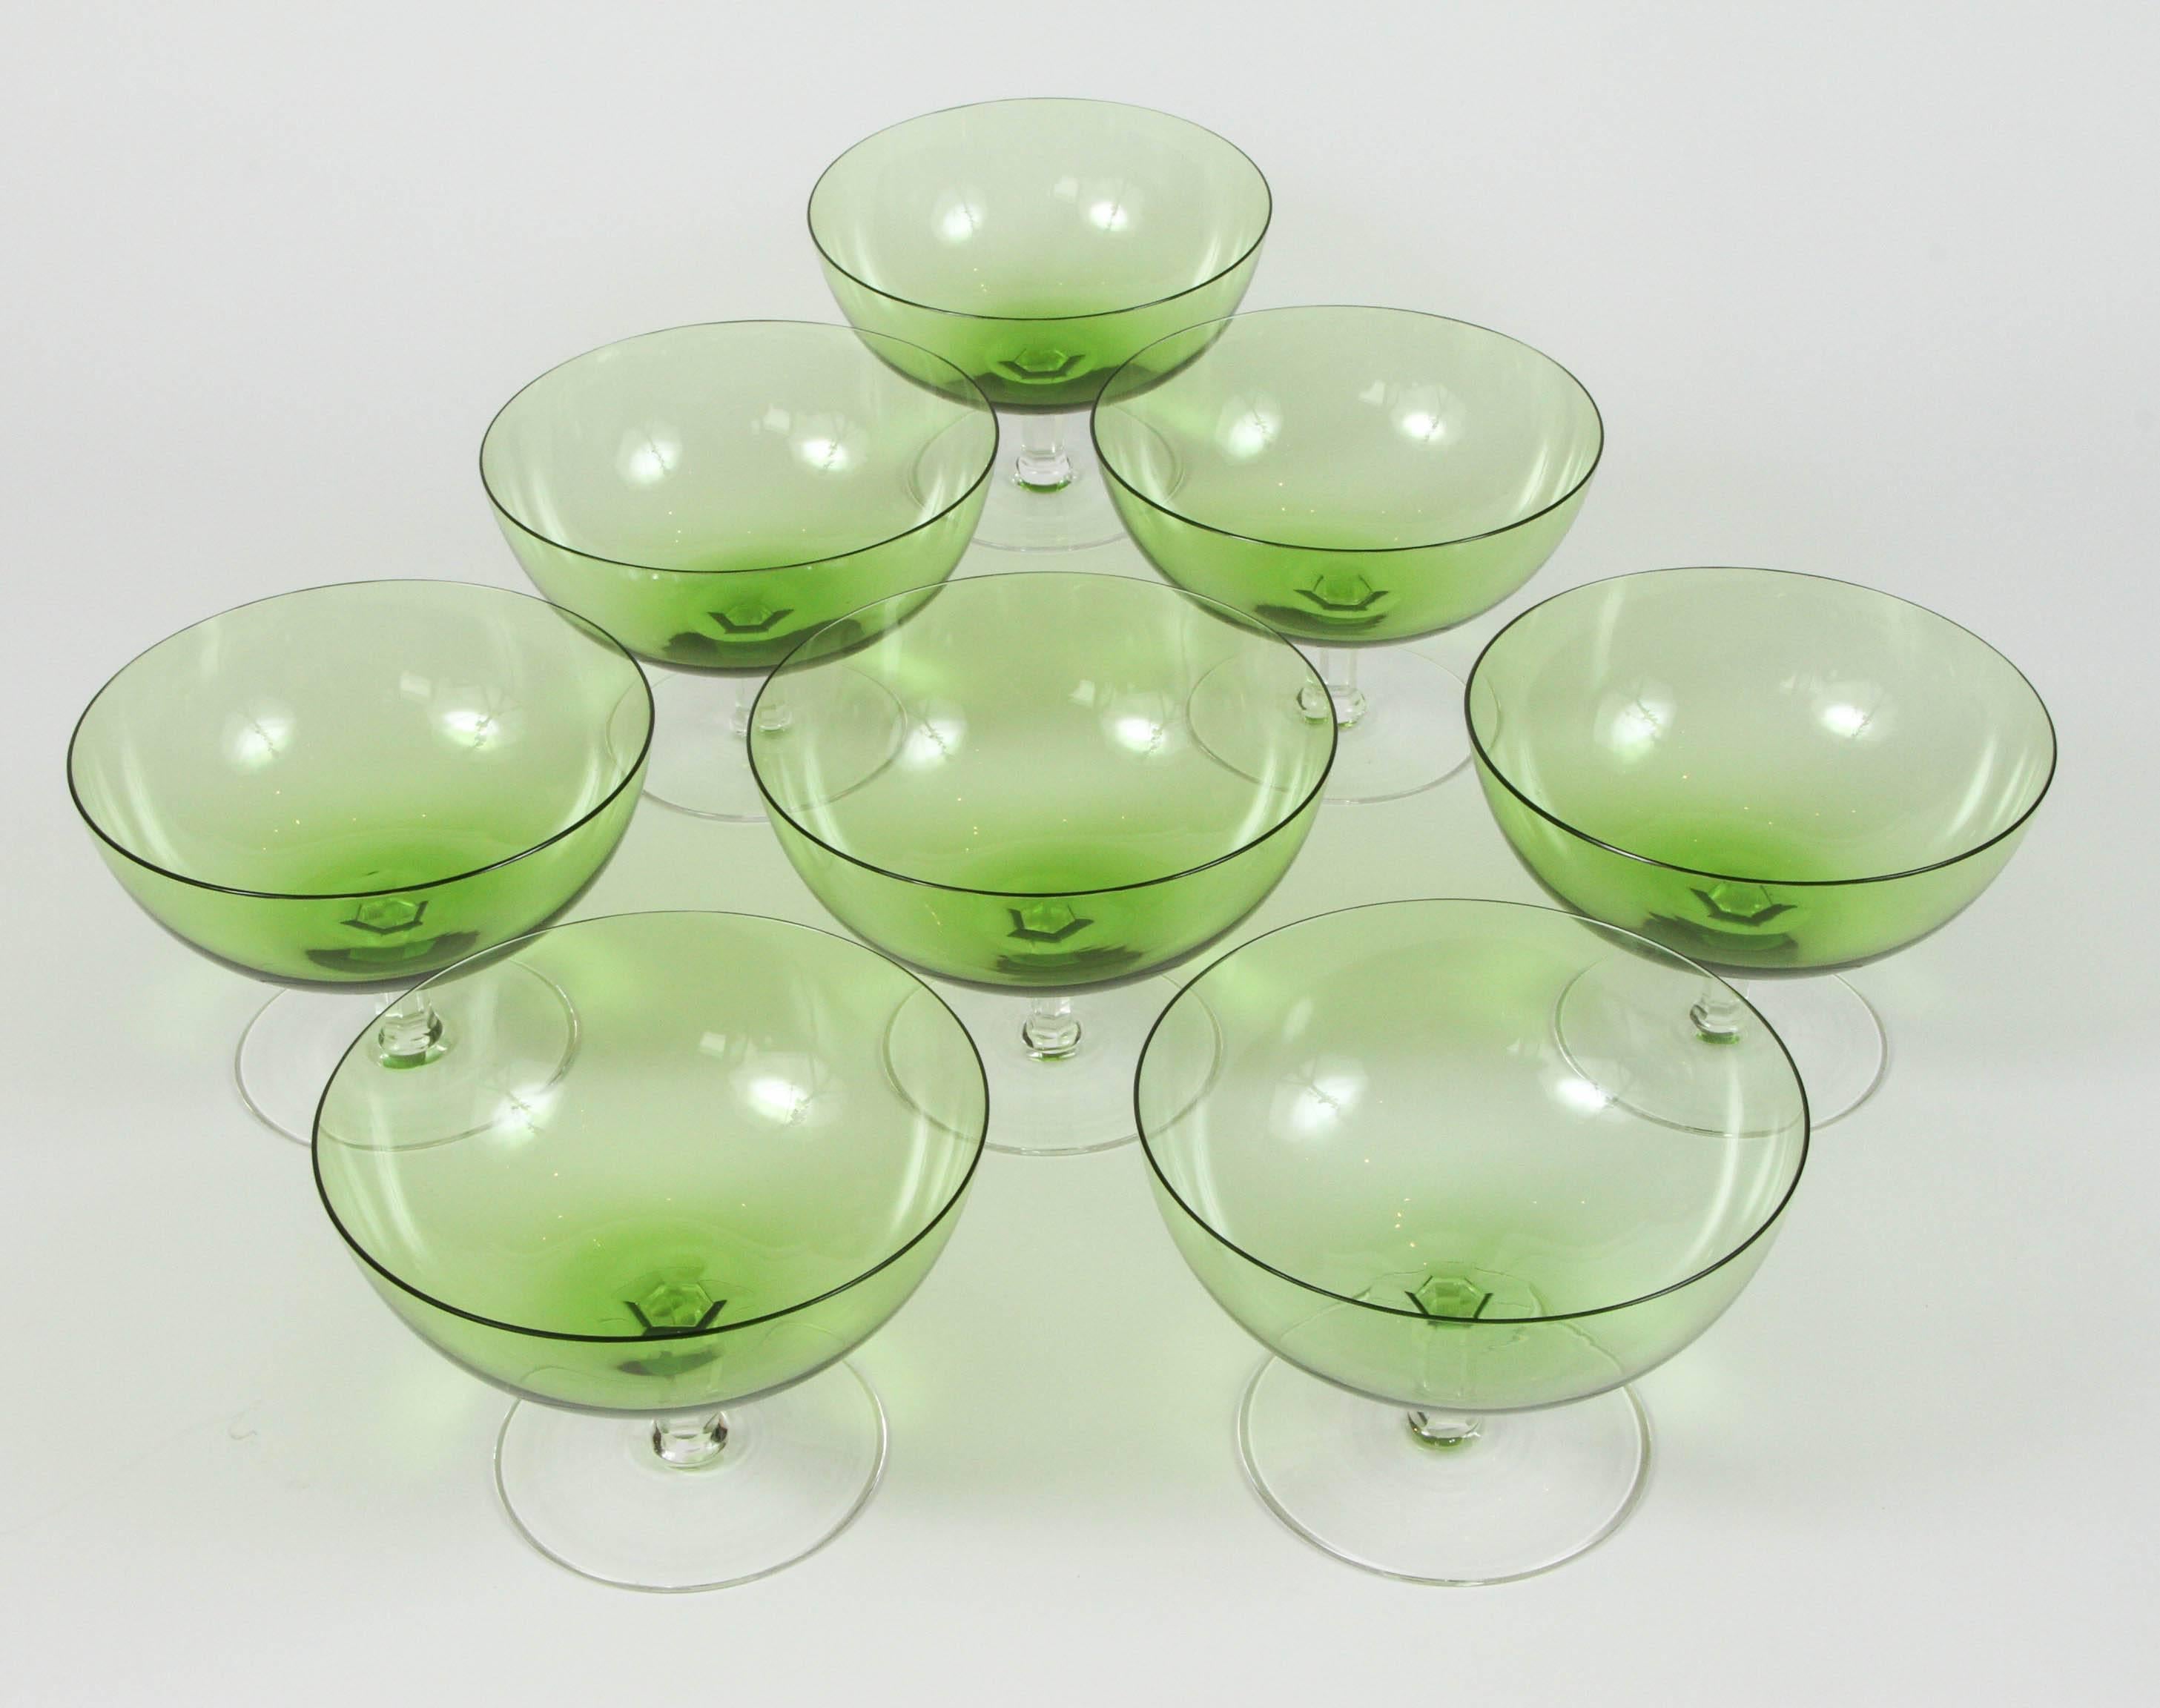 Set of eight vintage crystal dessert bowls with green glass bowls and clear foot stem.